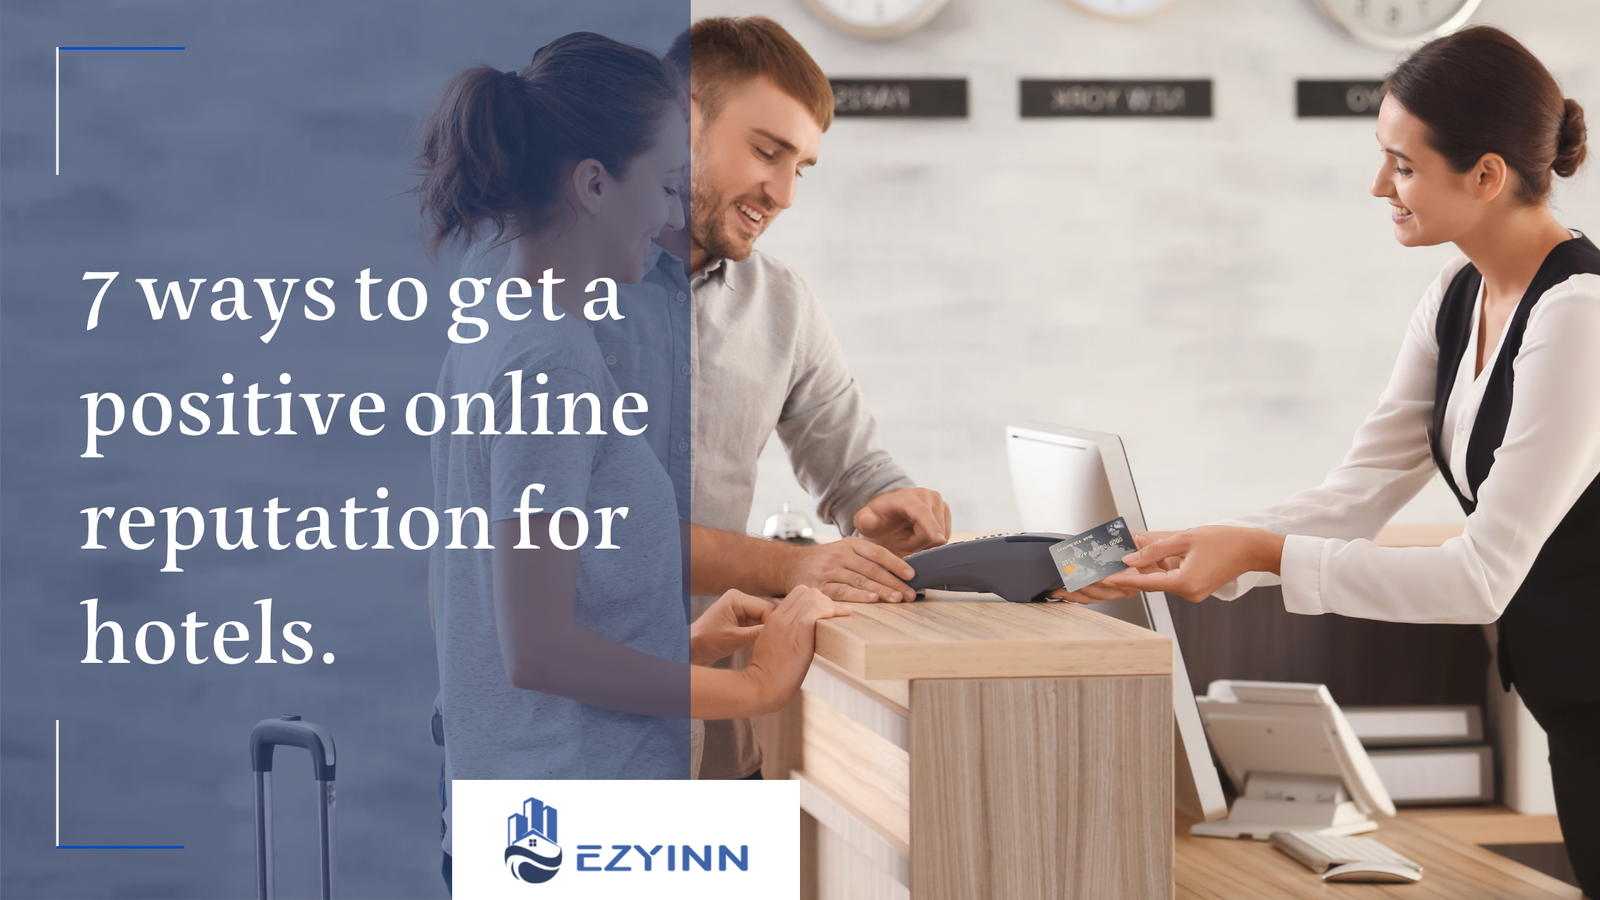 7 ways to get a positive online reputation for hotels. | Ezyinn PMS